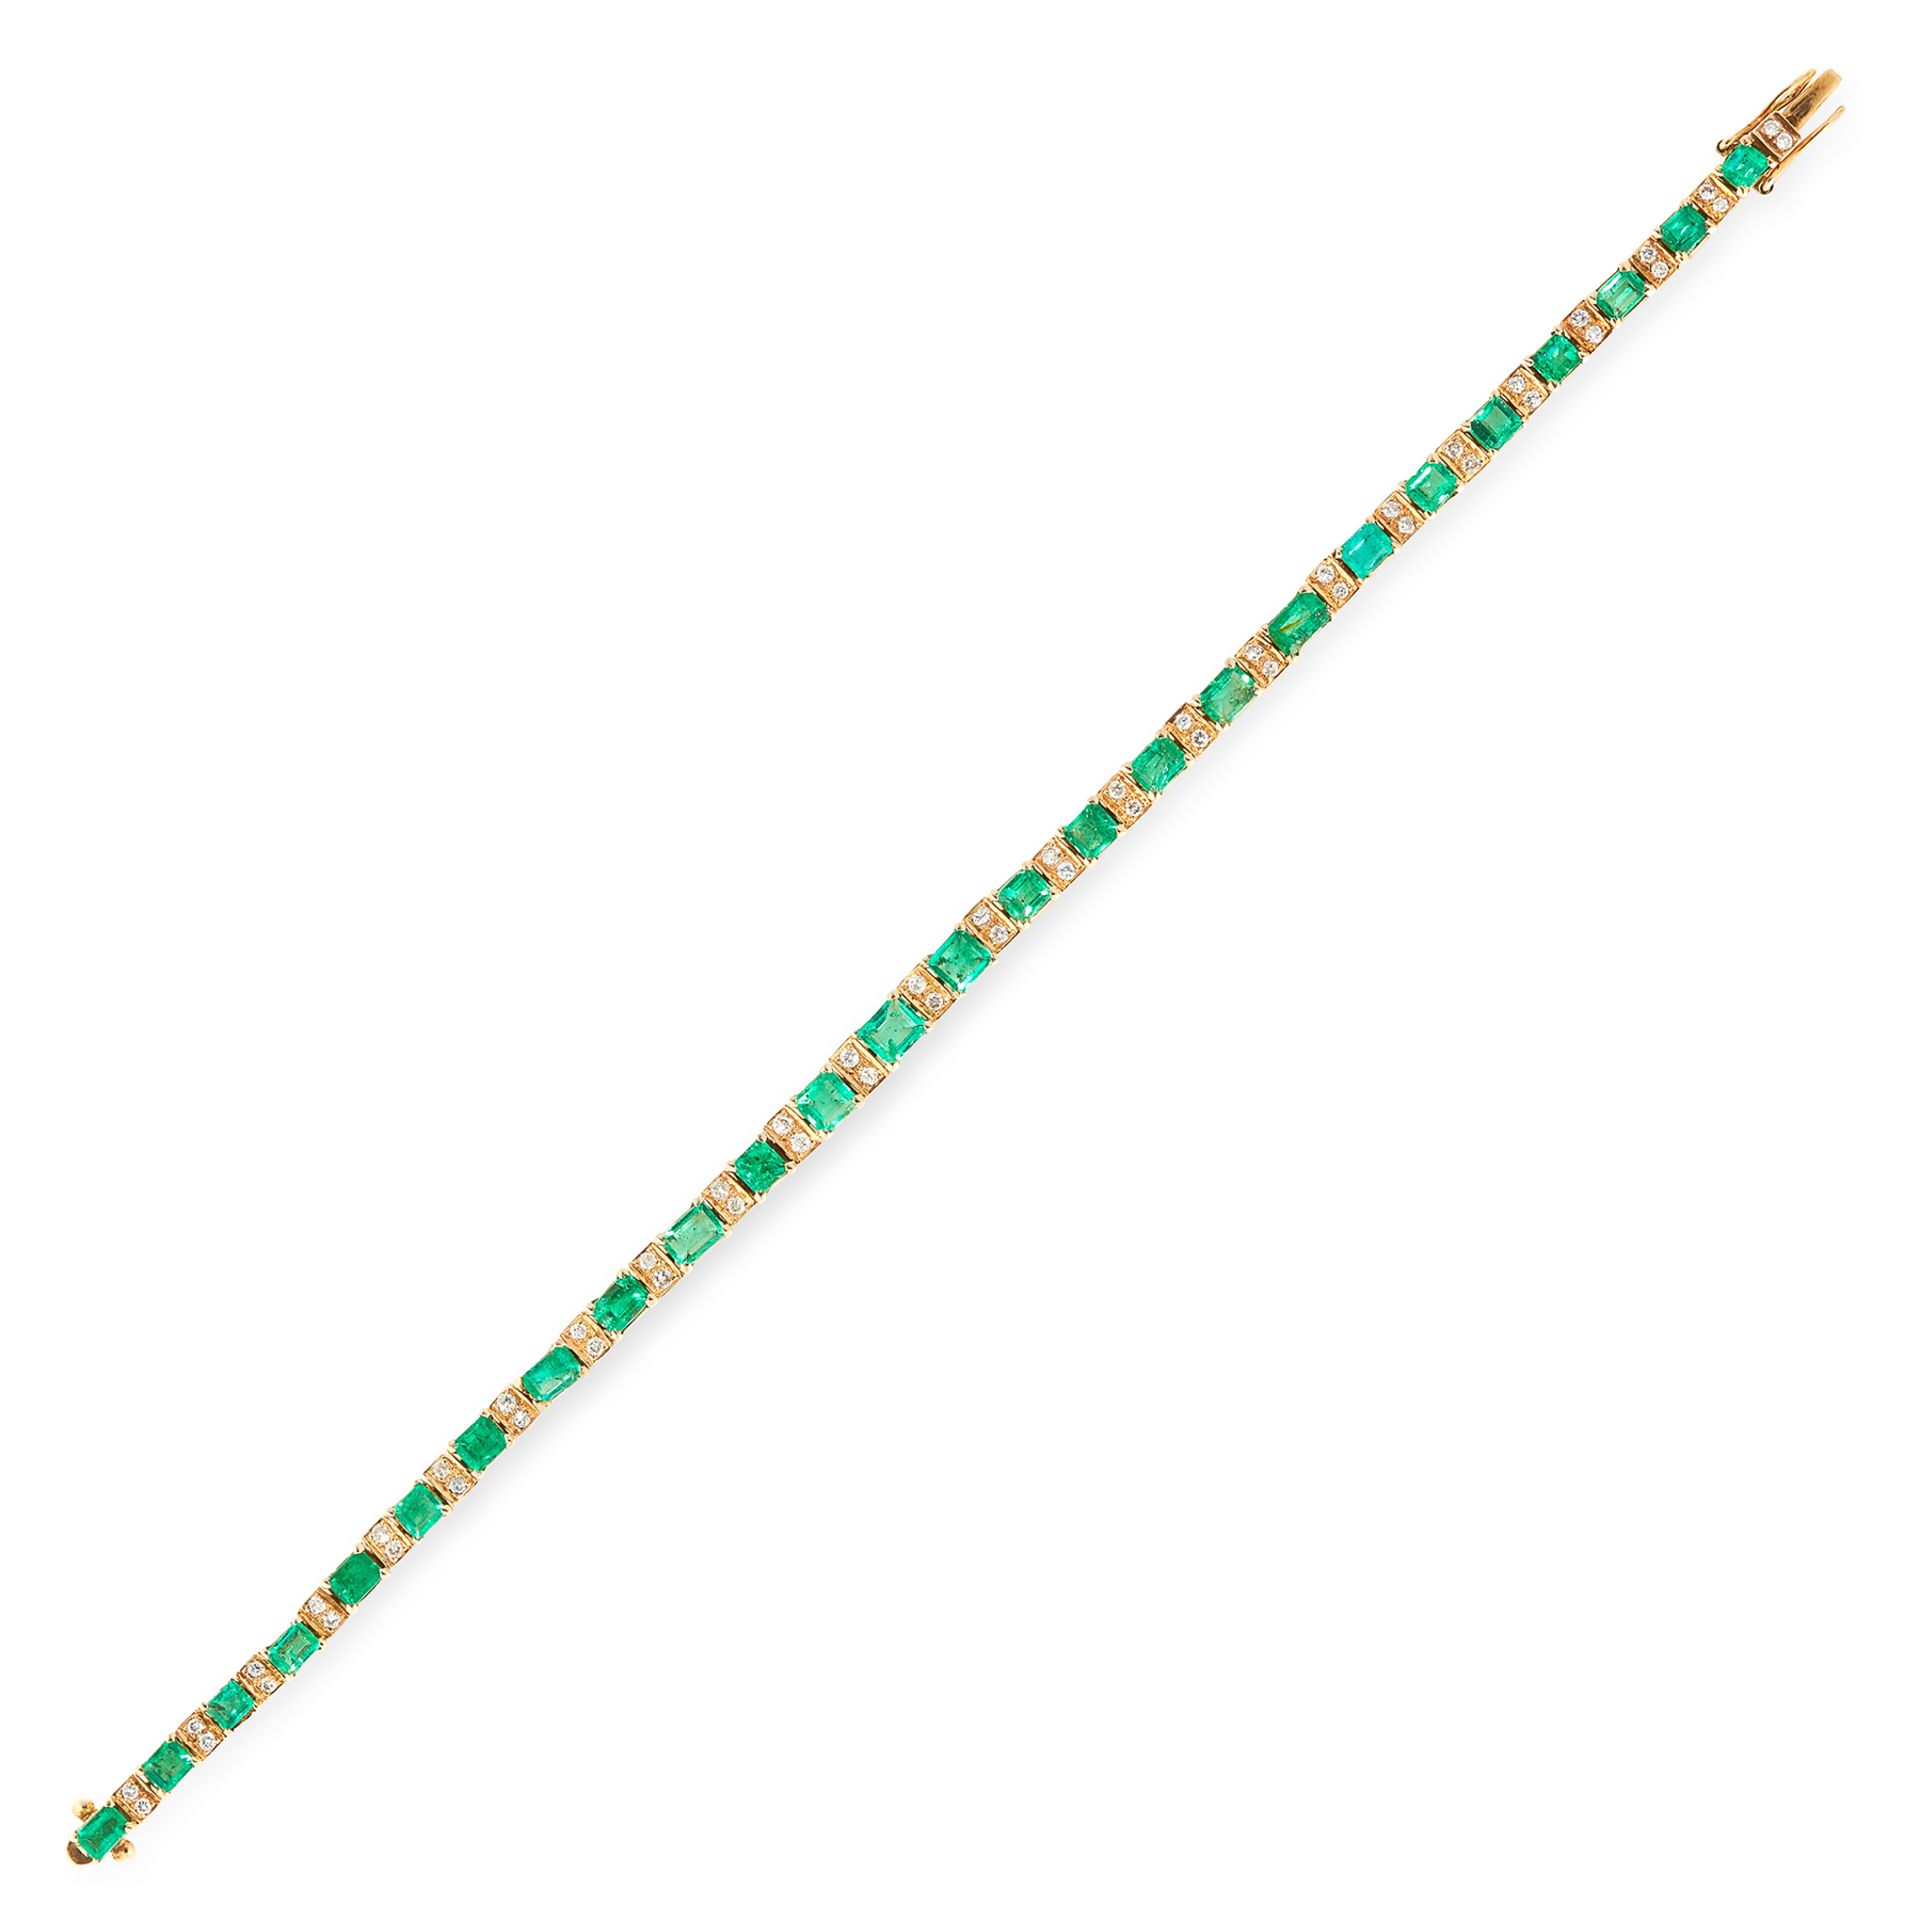 AN EMERALD AND DIAMOND BRACELET in 18ct yellow gold, comprising a single row of twenty six graduated